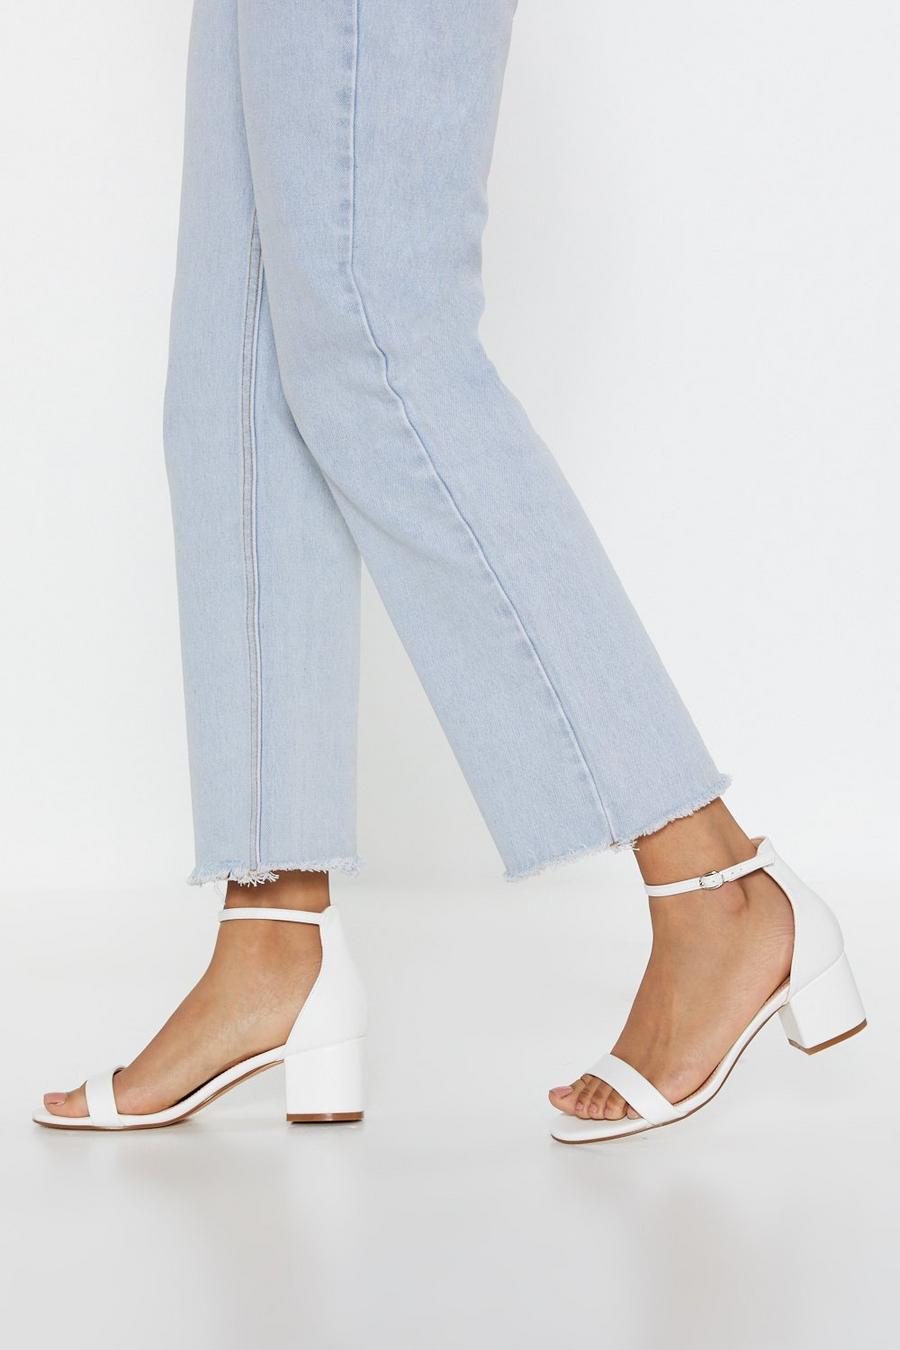 There's No Stopping You Faux Leather Sandals